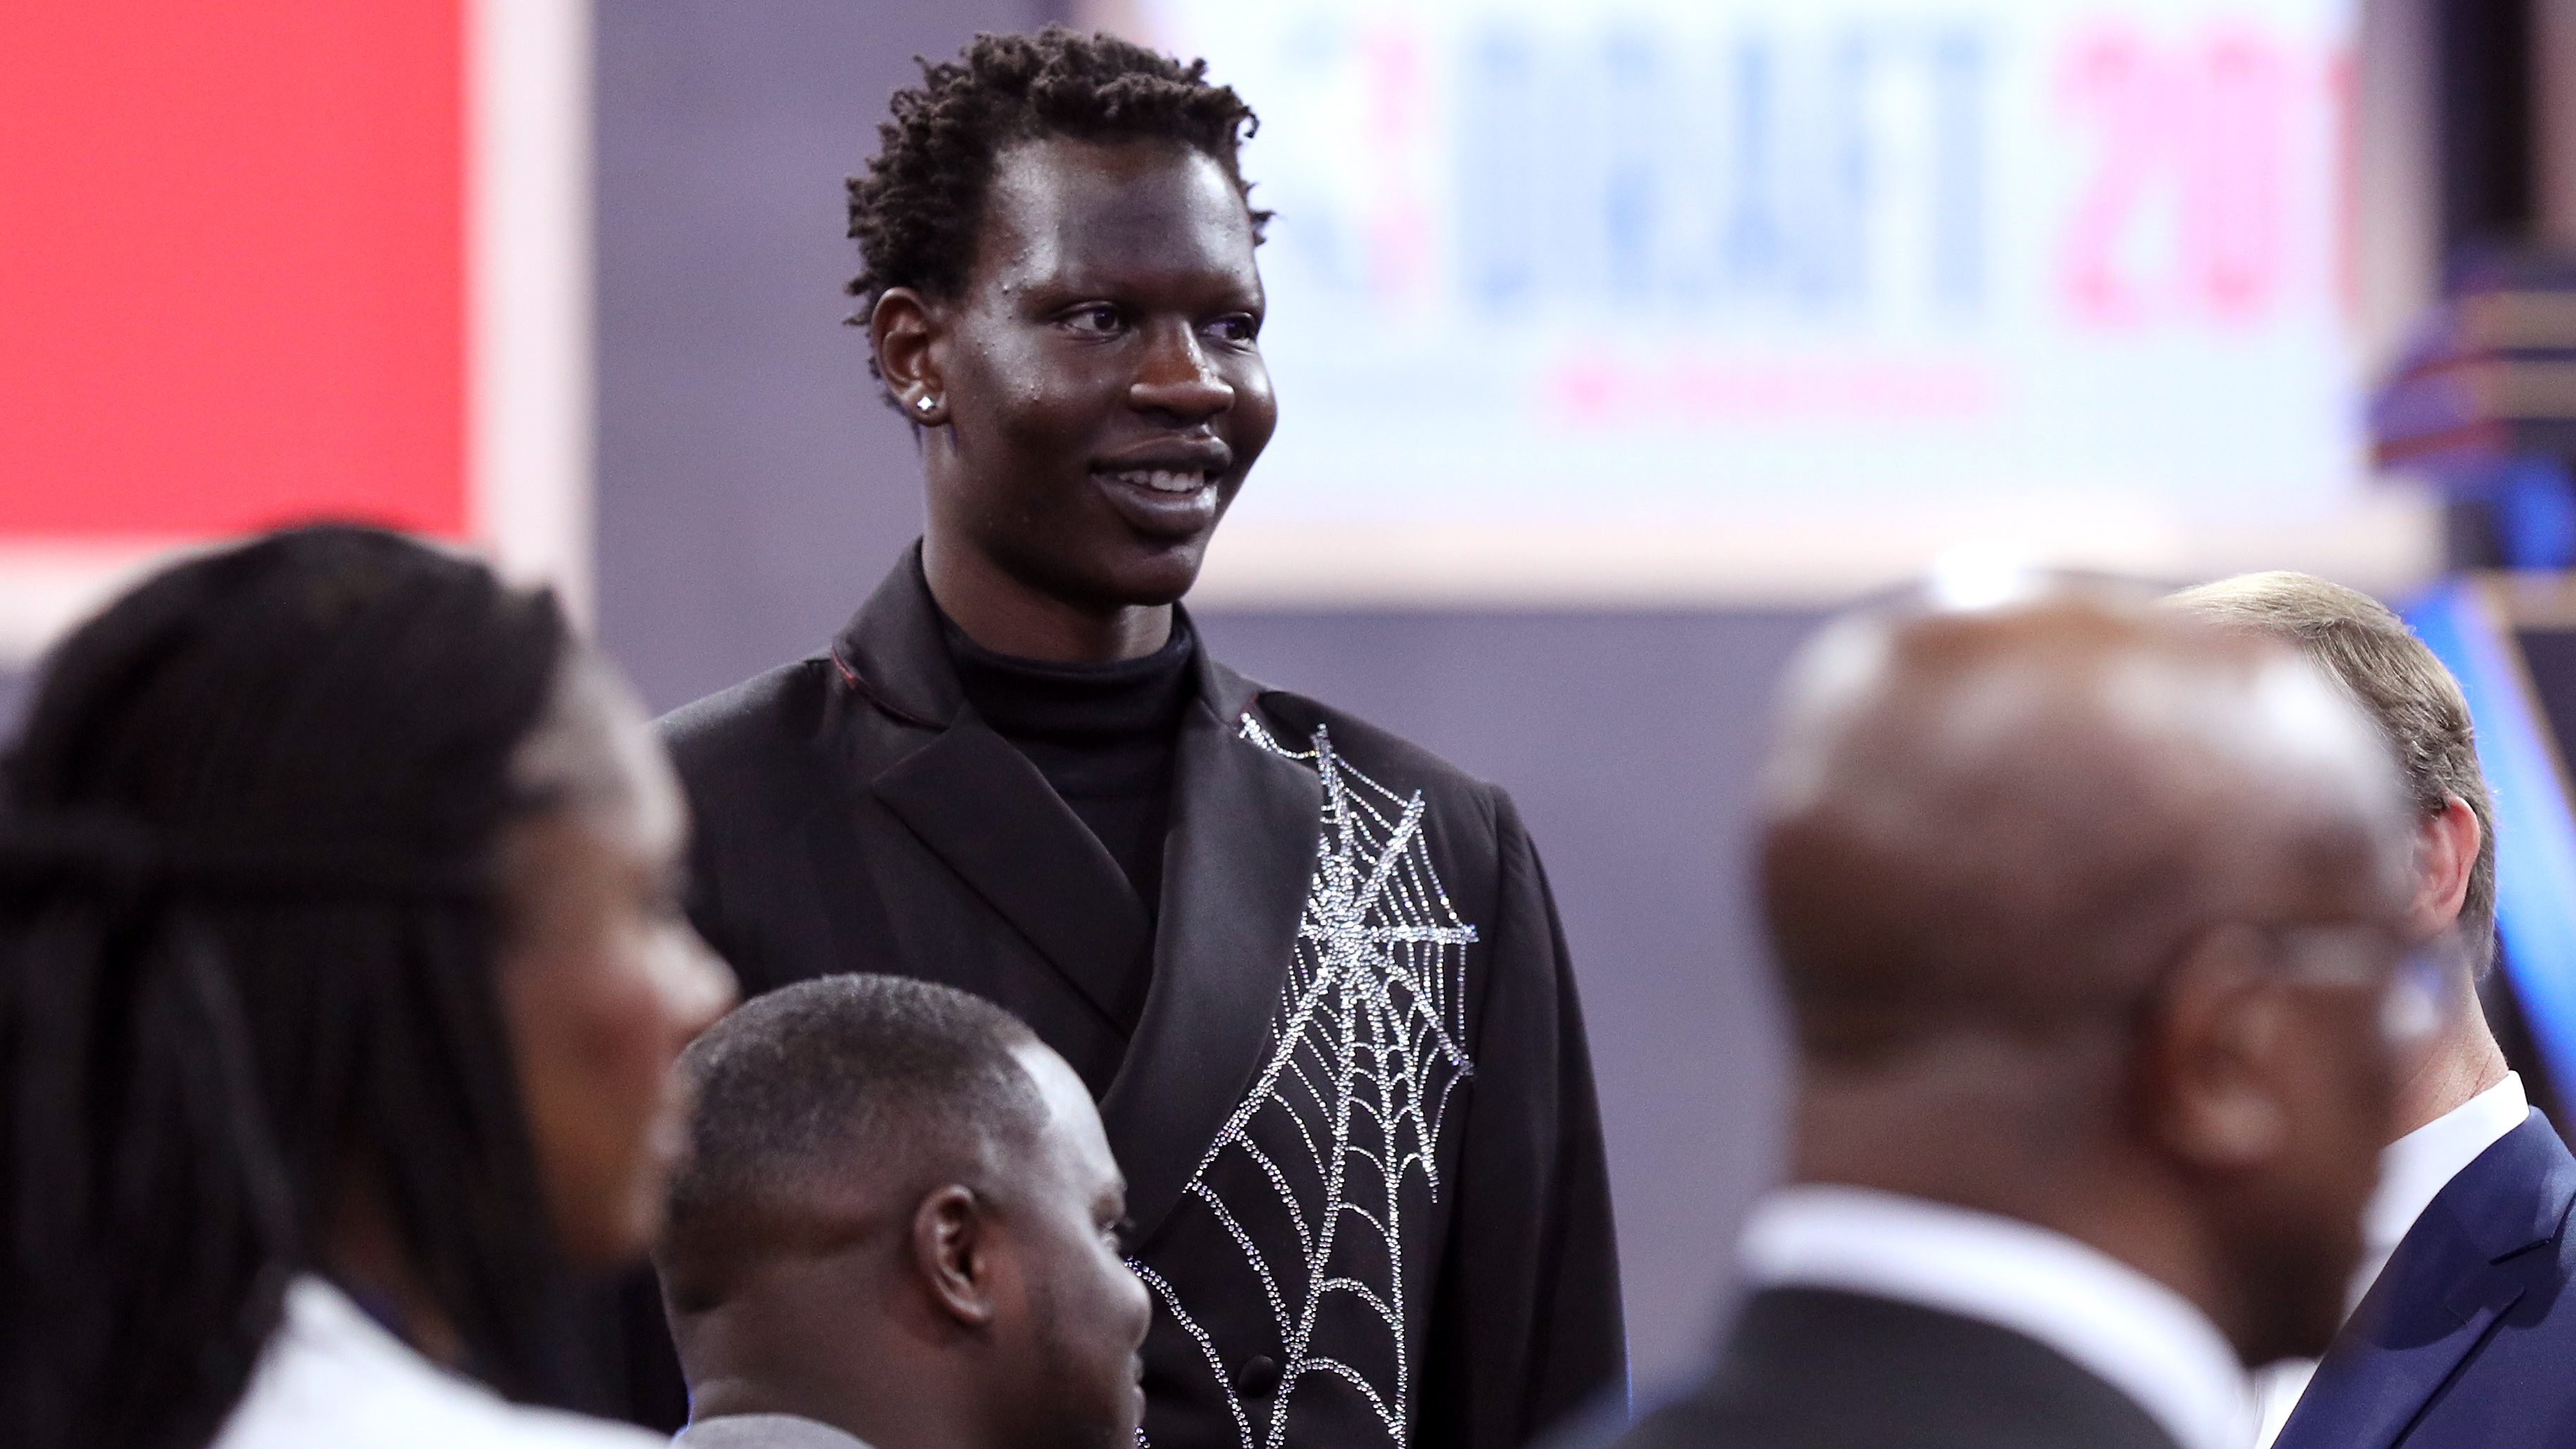 Bol Bol Steals Nba Draft With Incredible Spiderweb Suit Photo Heavy Com